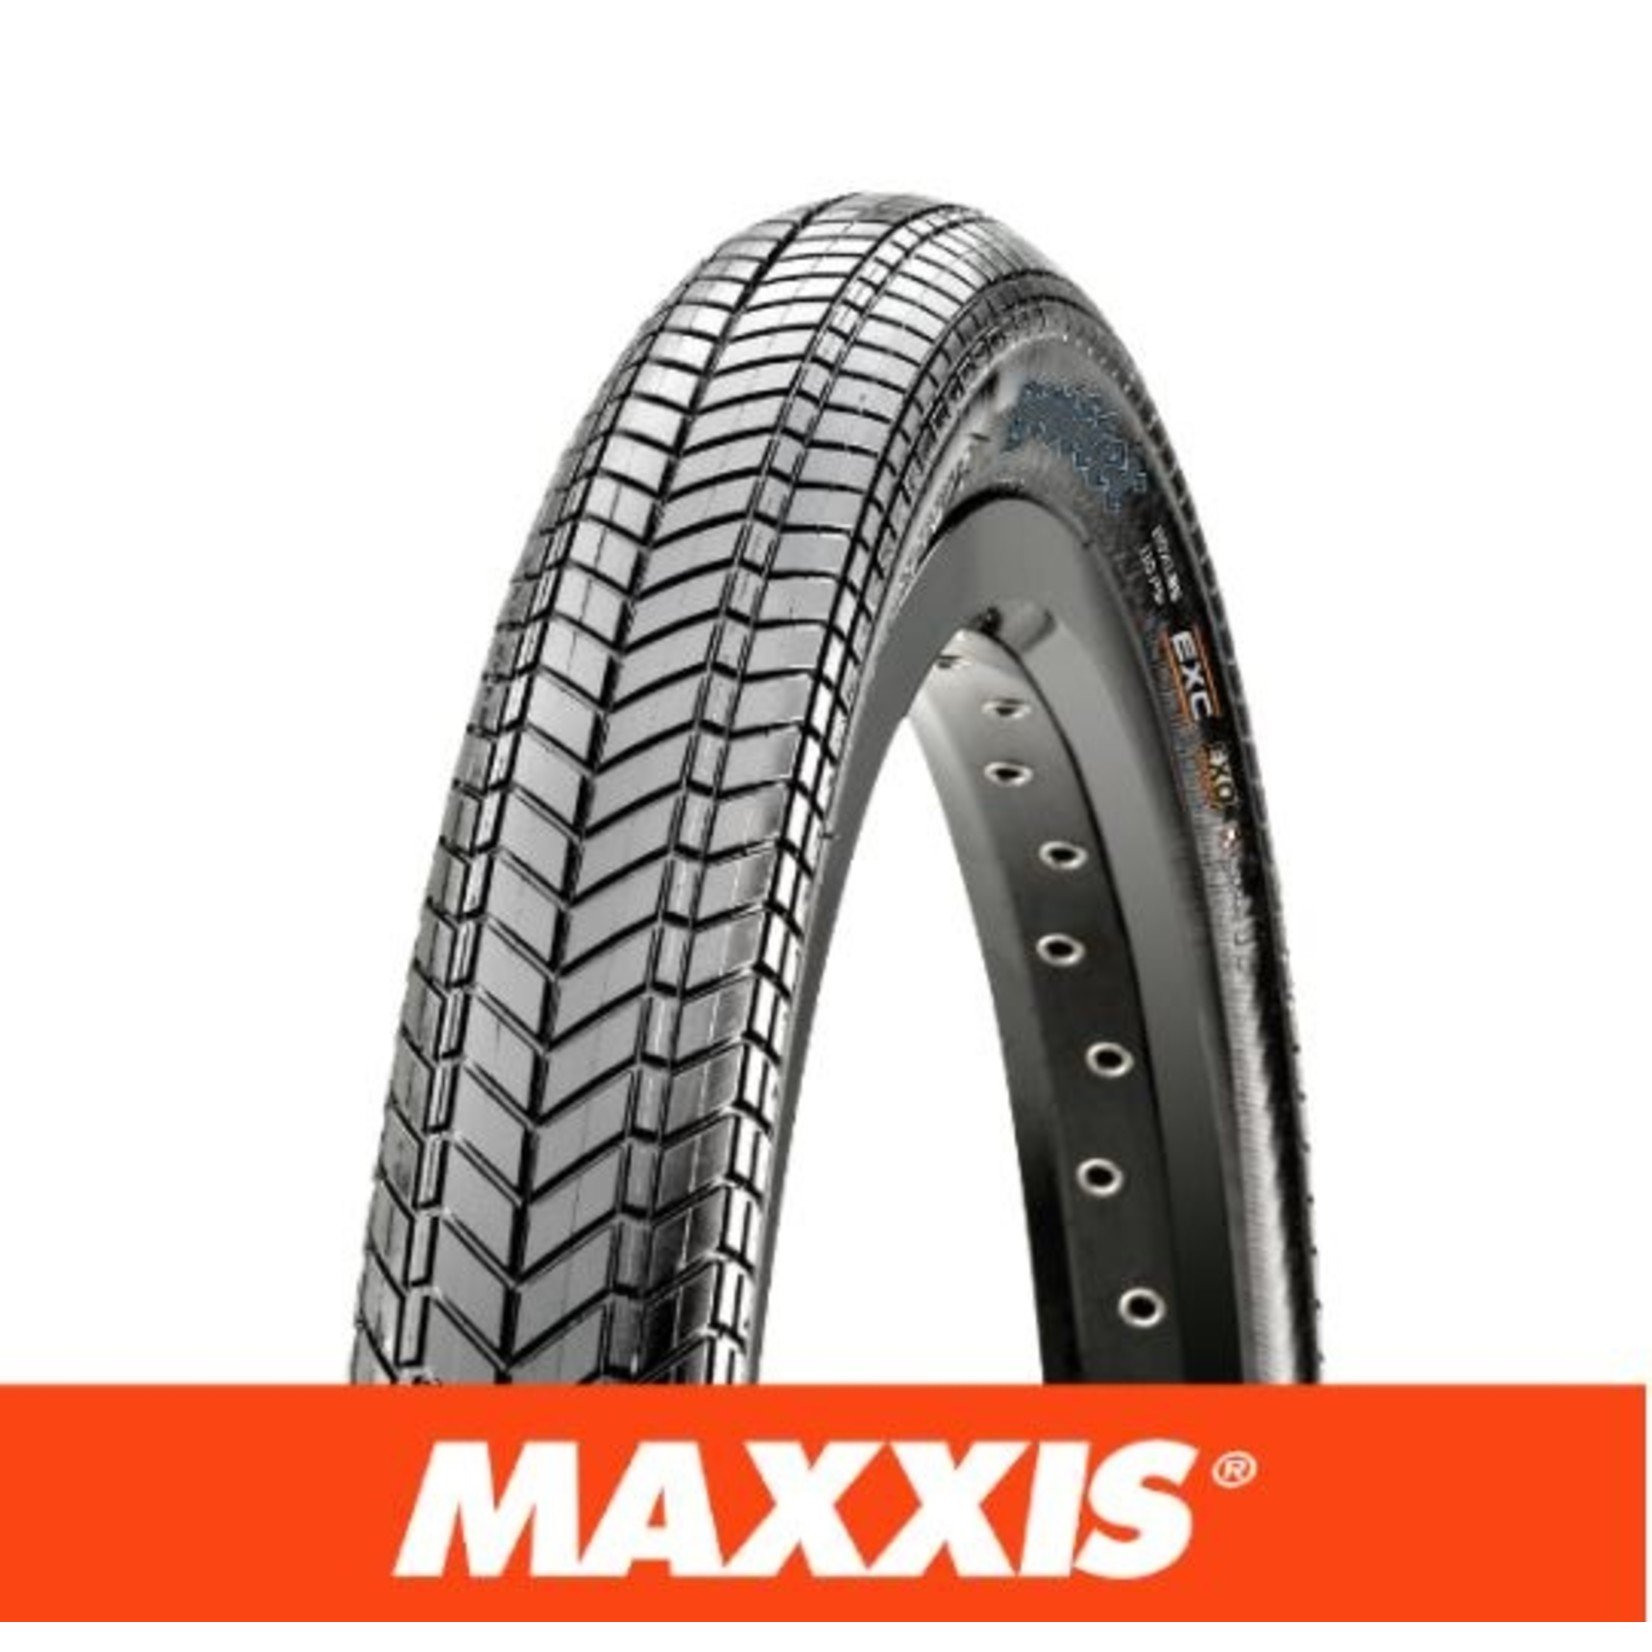 Maxxis Maxxis Grifter Bike Tyre - 20 X 1.85 - 120 TPI - Foldable - Exo